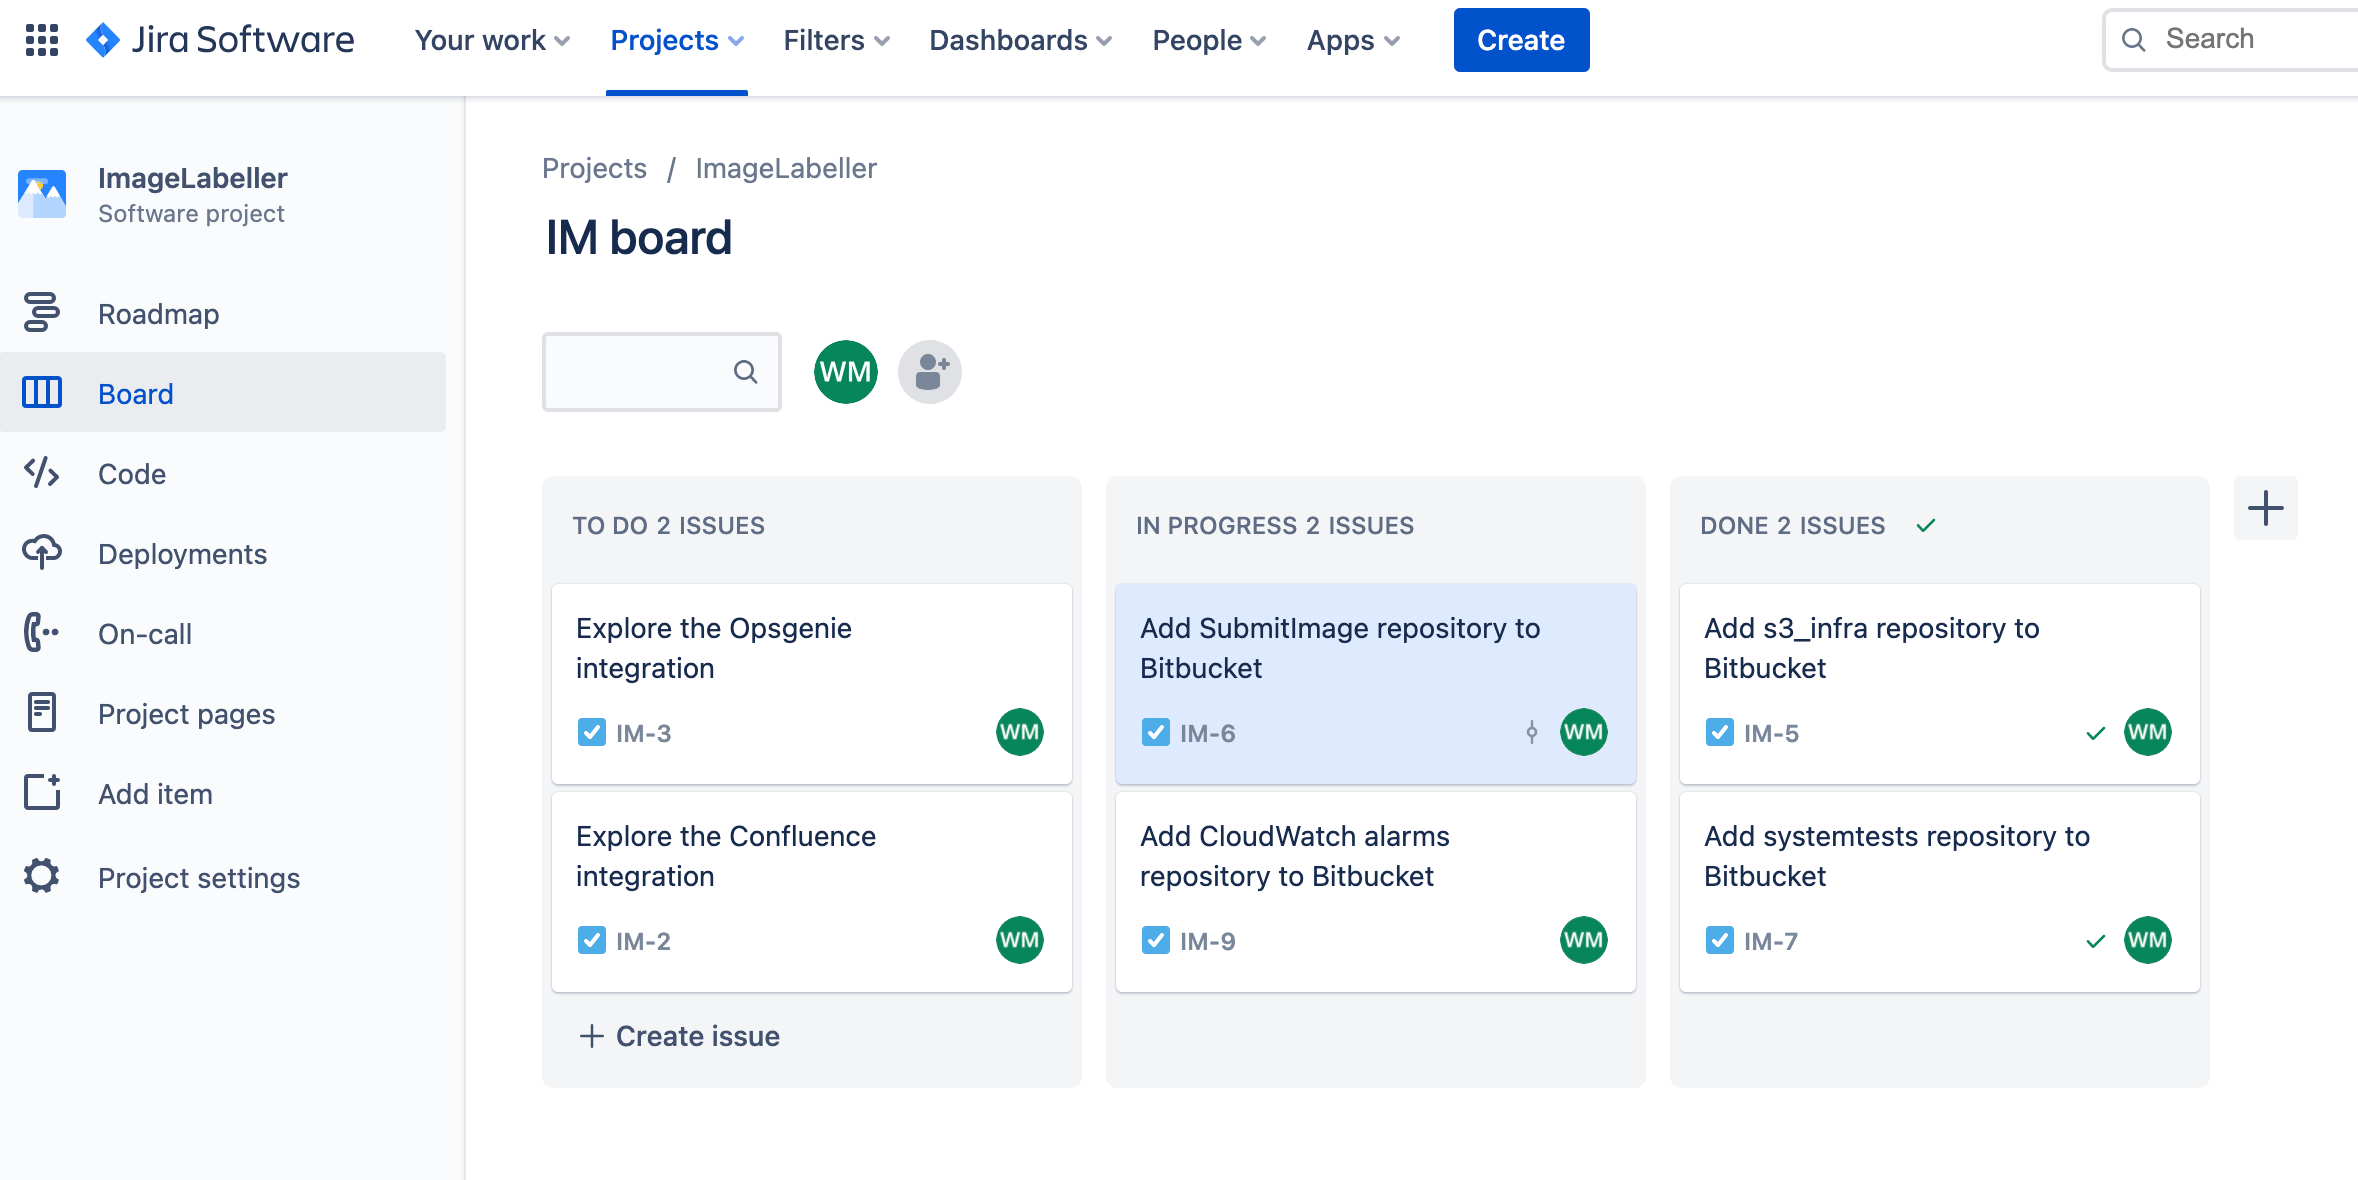 Creating an issue in Jira Software for adding a SubmitImage repository to Bitbucket